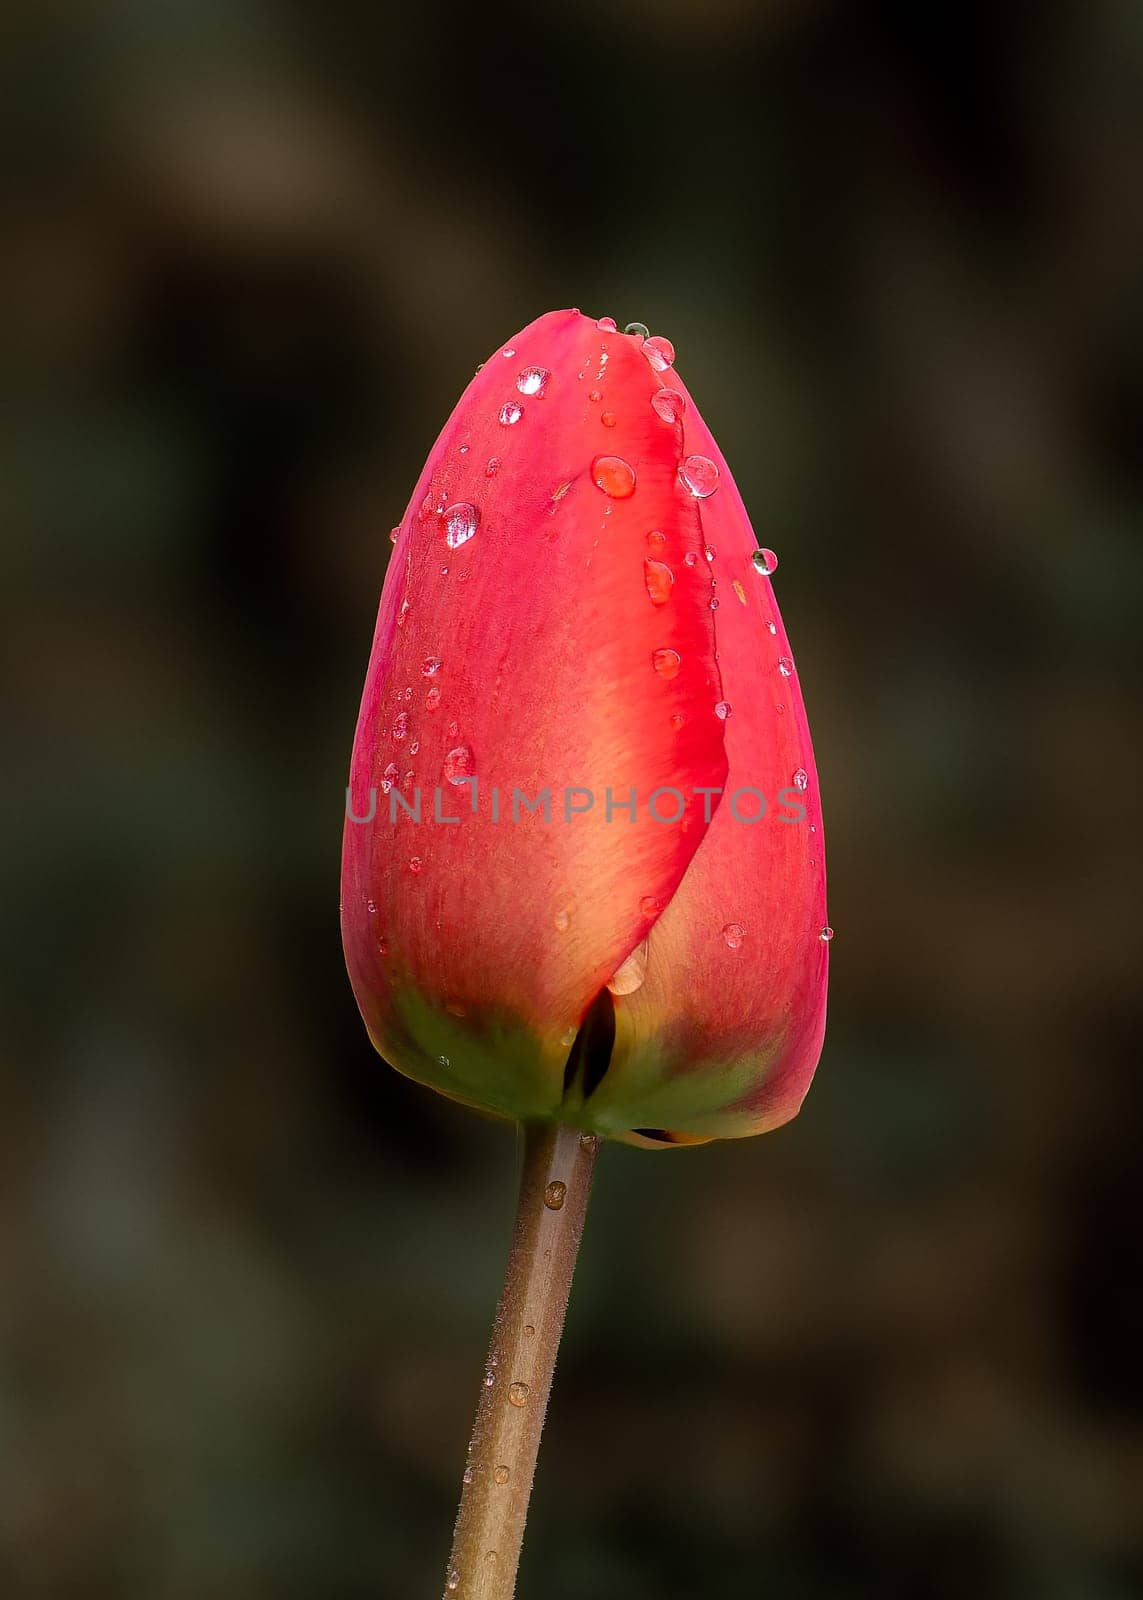 Red tulip with rain drops on dark background by Millenn